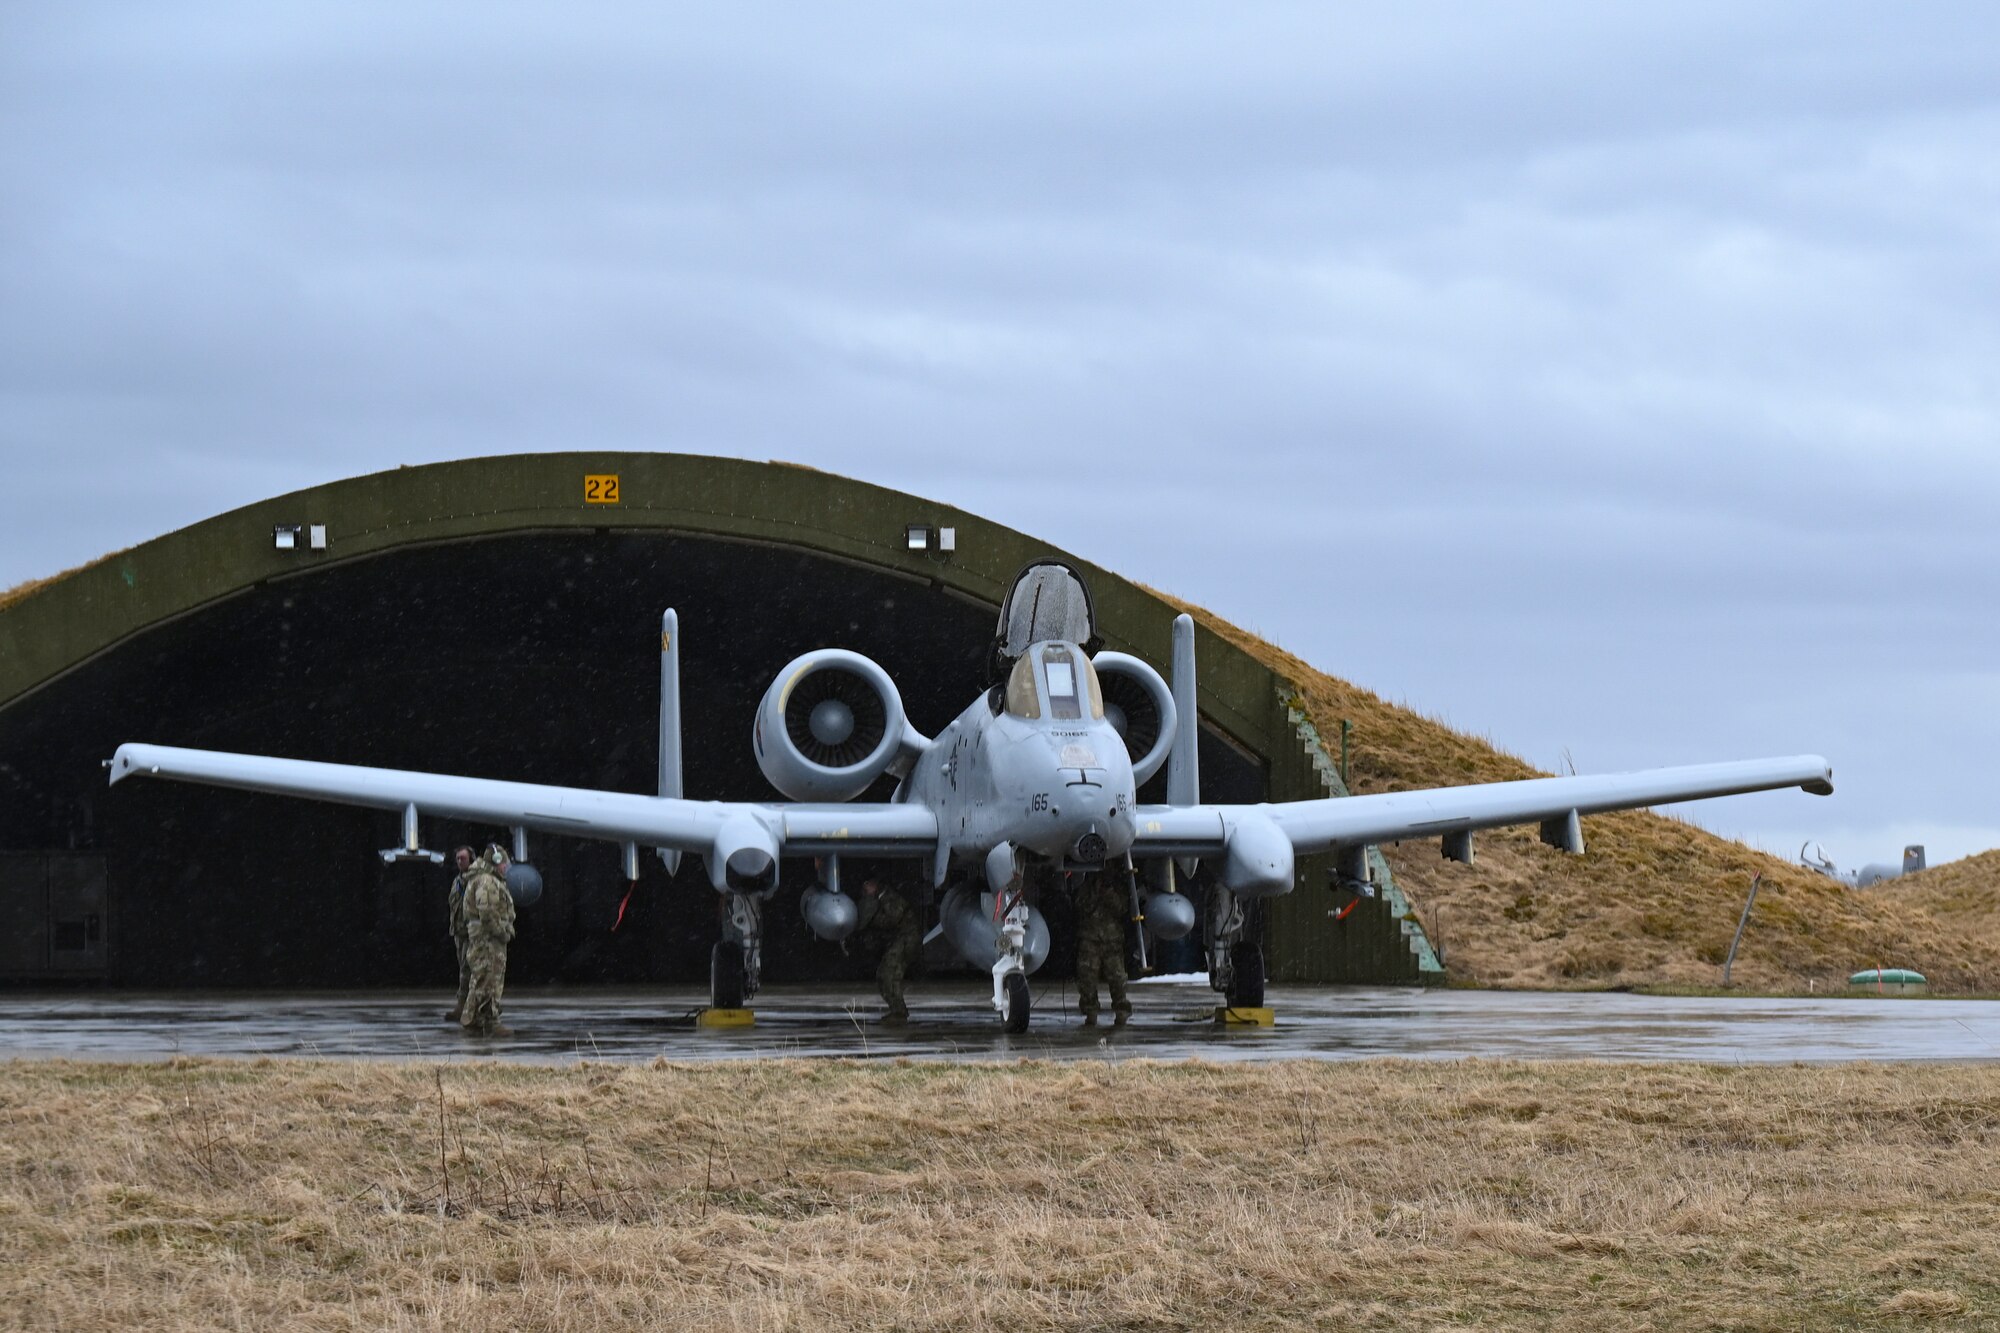 An A-10C Thunderbolt II aircraft assigned to the 104th Fighter Squadron, Maryland Air National Guard, prepares for flight at Andoya Air Base in Andenes, Norway, ready to conduct Agile Combat Employment training in support of the Swift Response exercise, May 6, 2022.